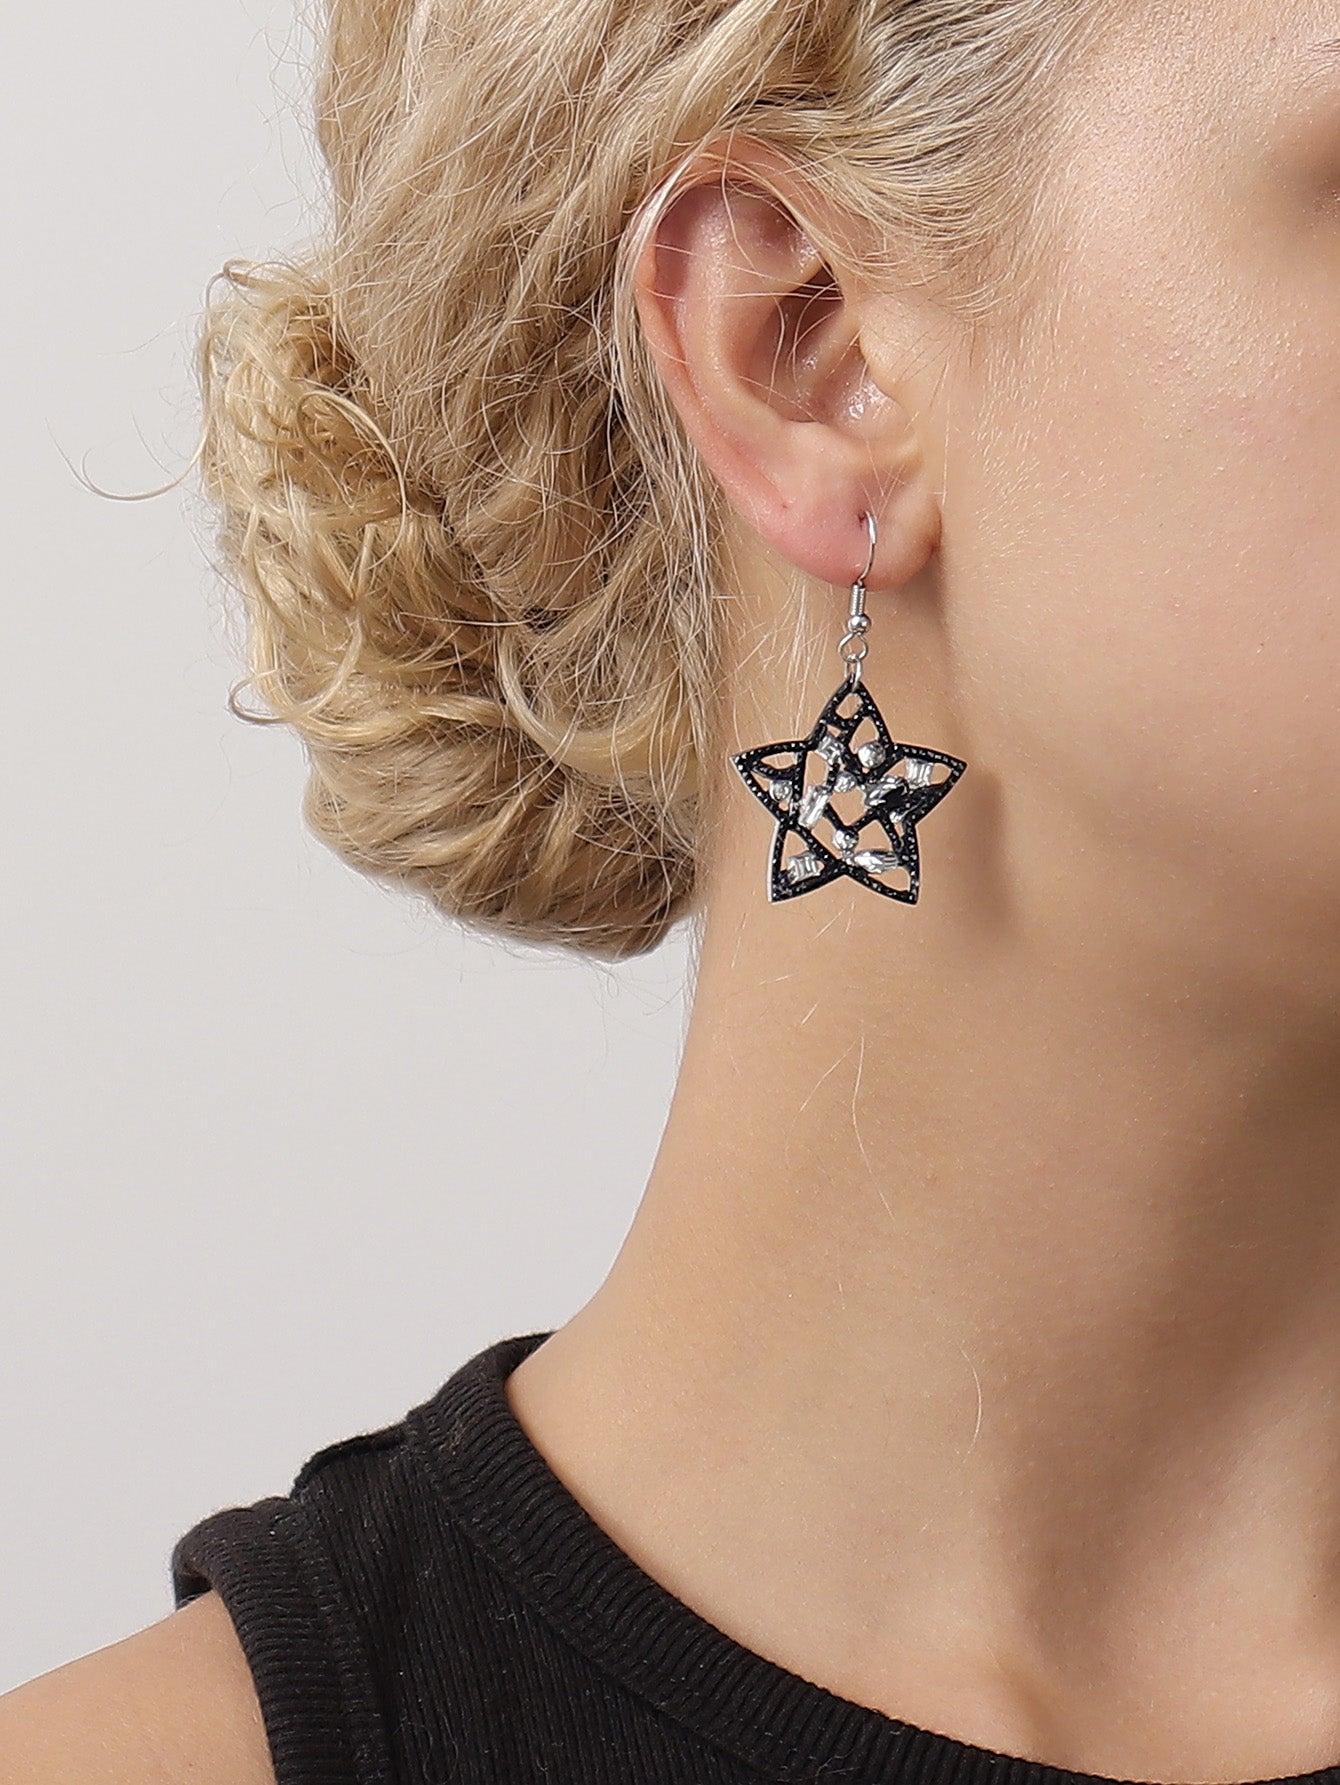 1 Pair Casual Elegant Shiny Star Hollow Out Arylic Drop Earrings